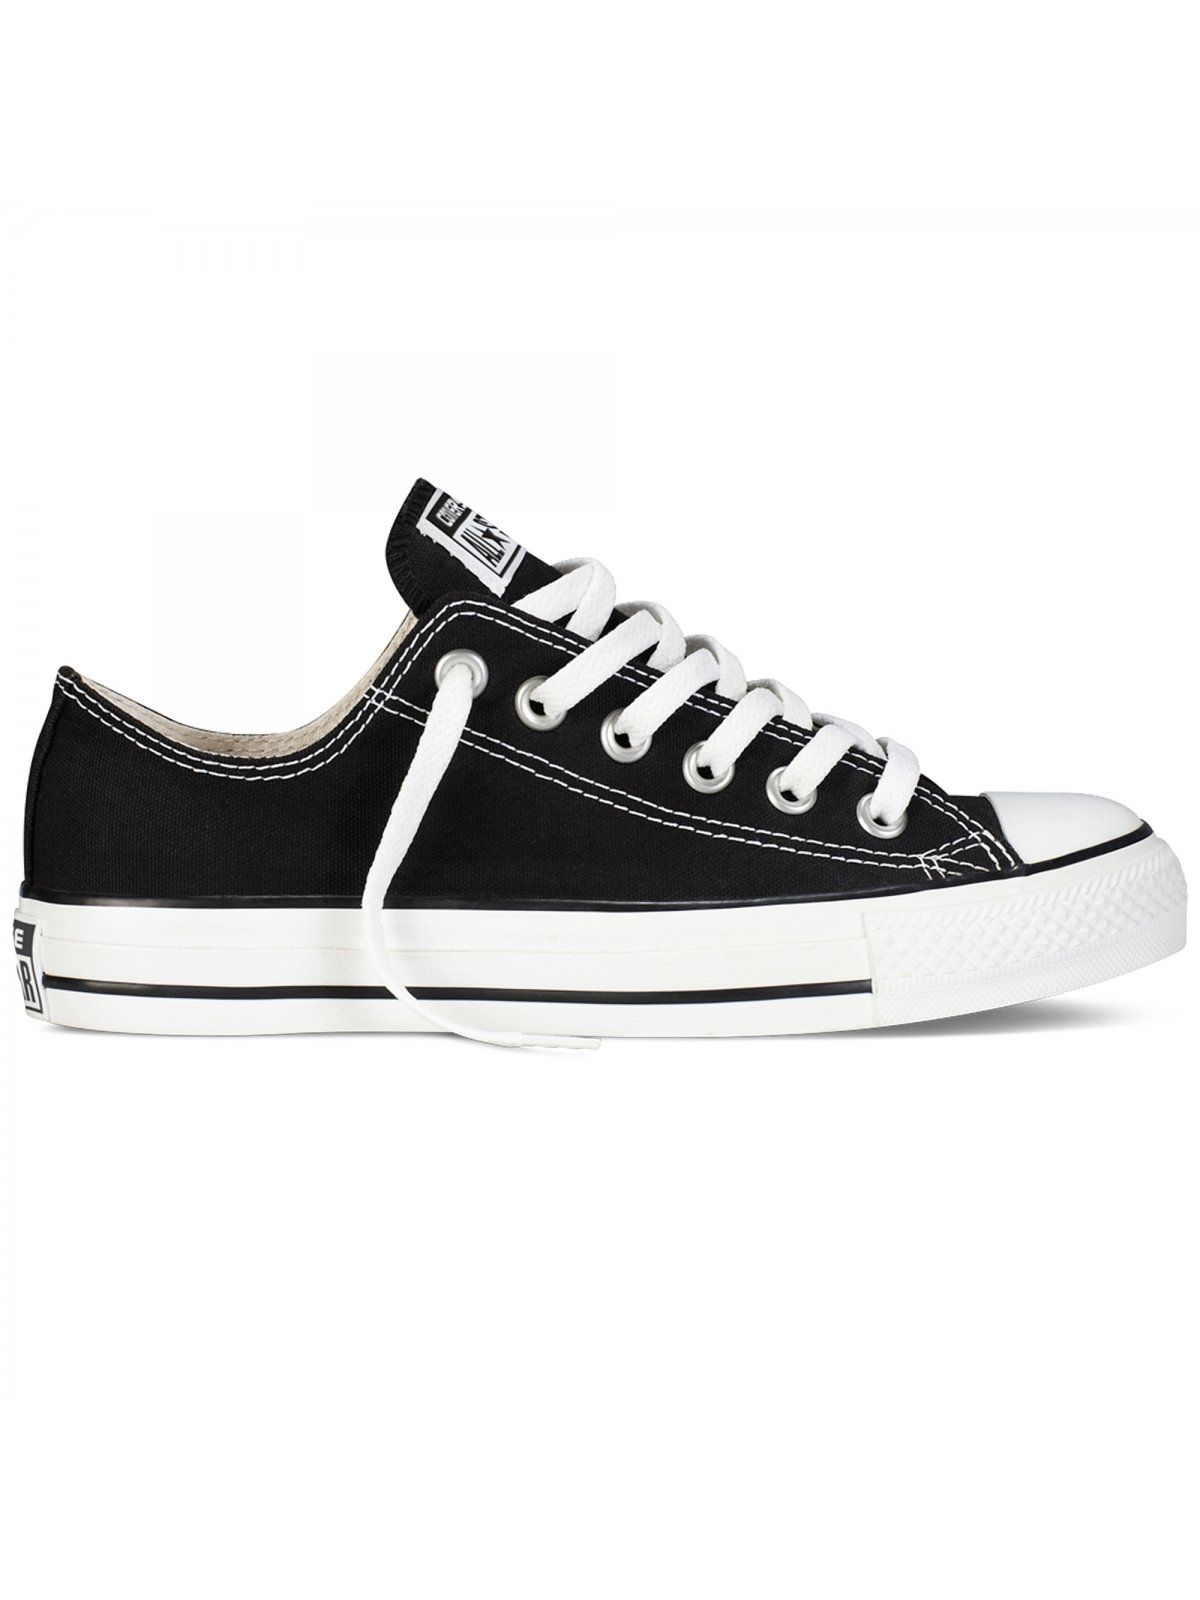 Converse All Star Unisex Chuck Taylor Low Top - Black/White